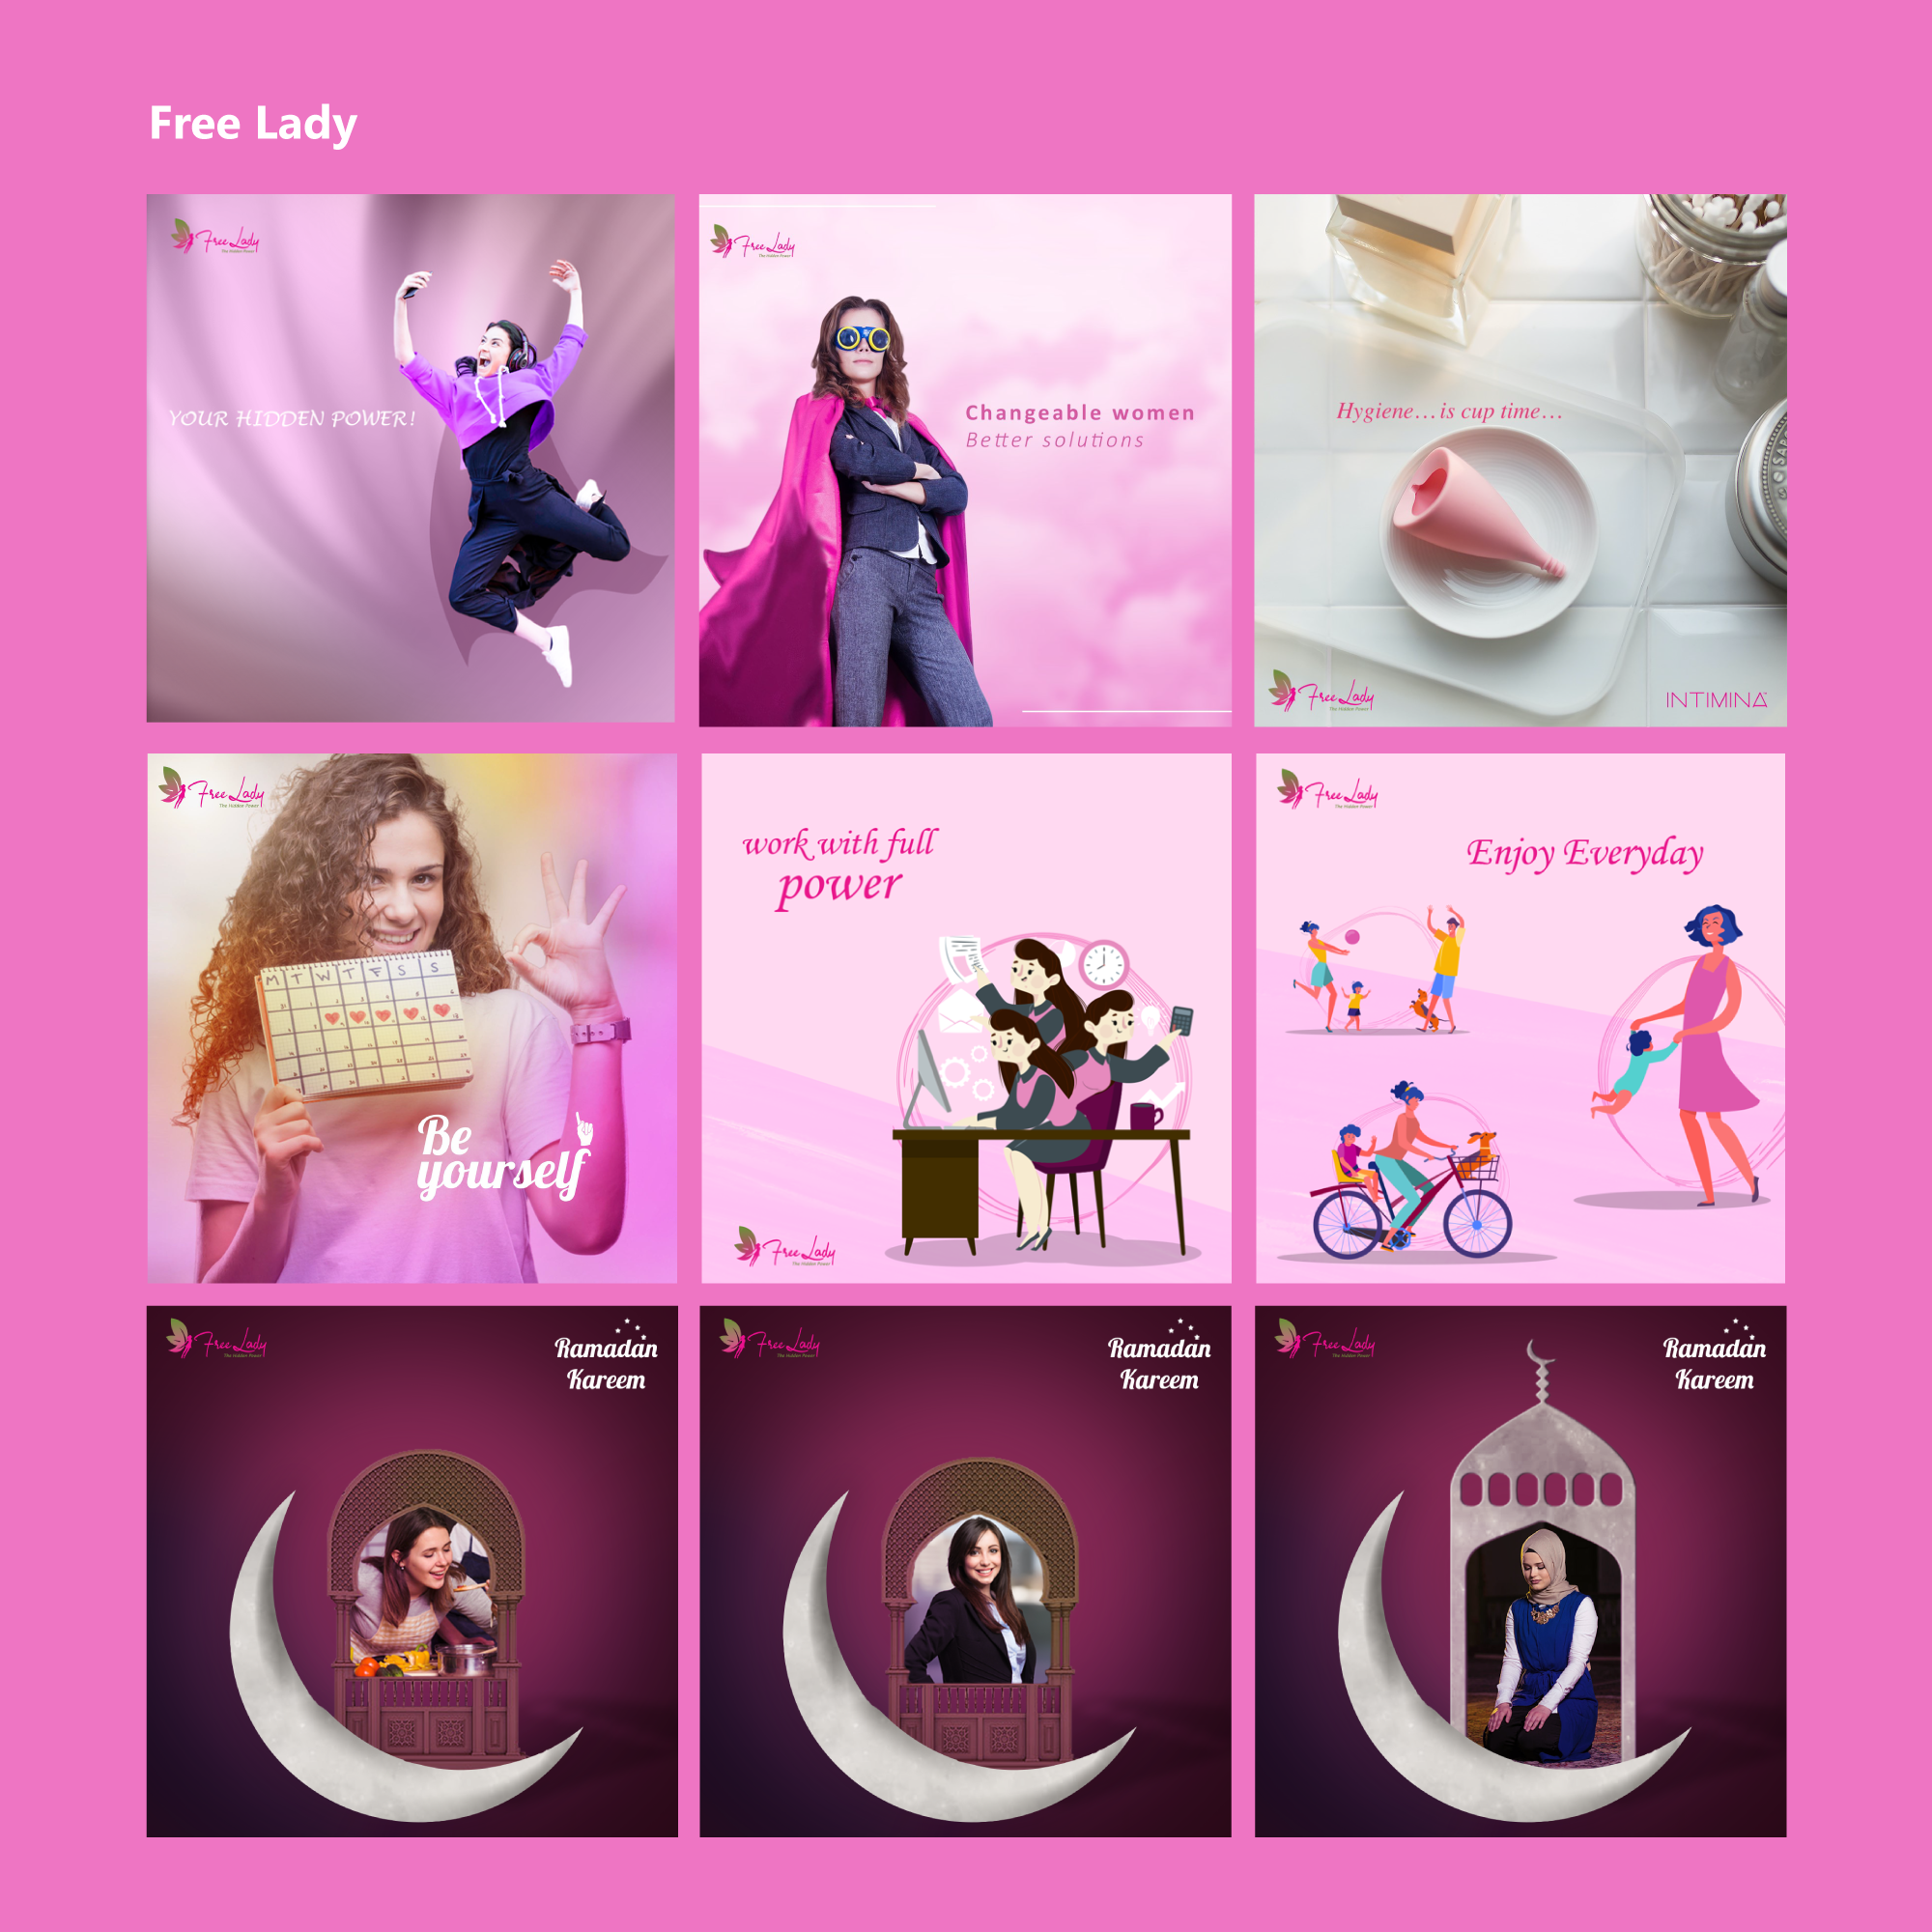 Social Media Designs For Free Lady in 2020